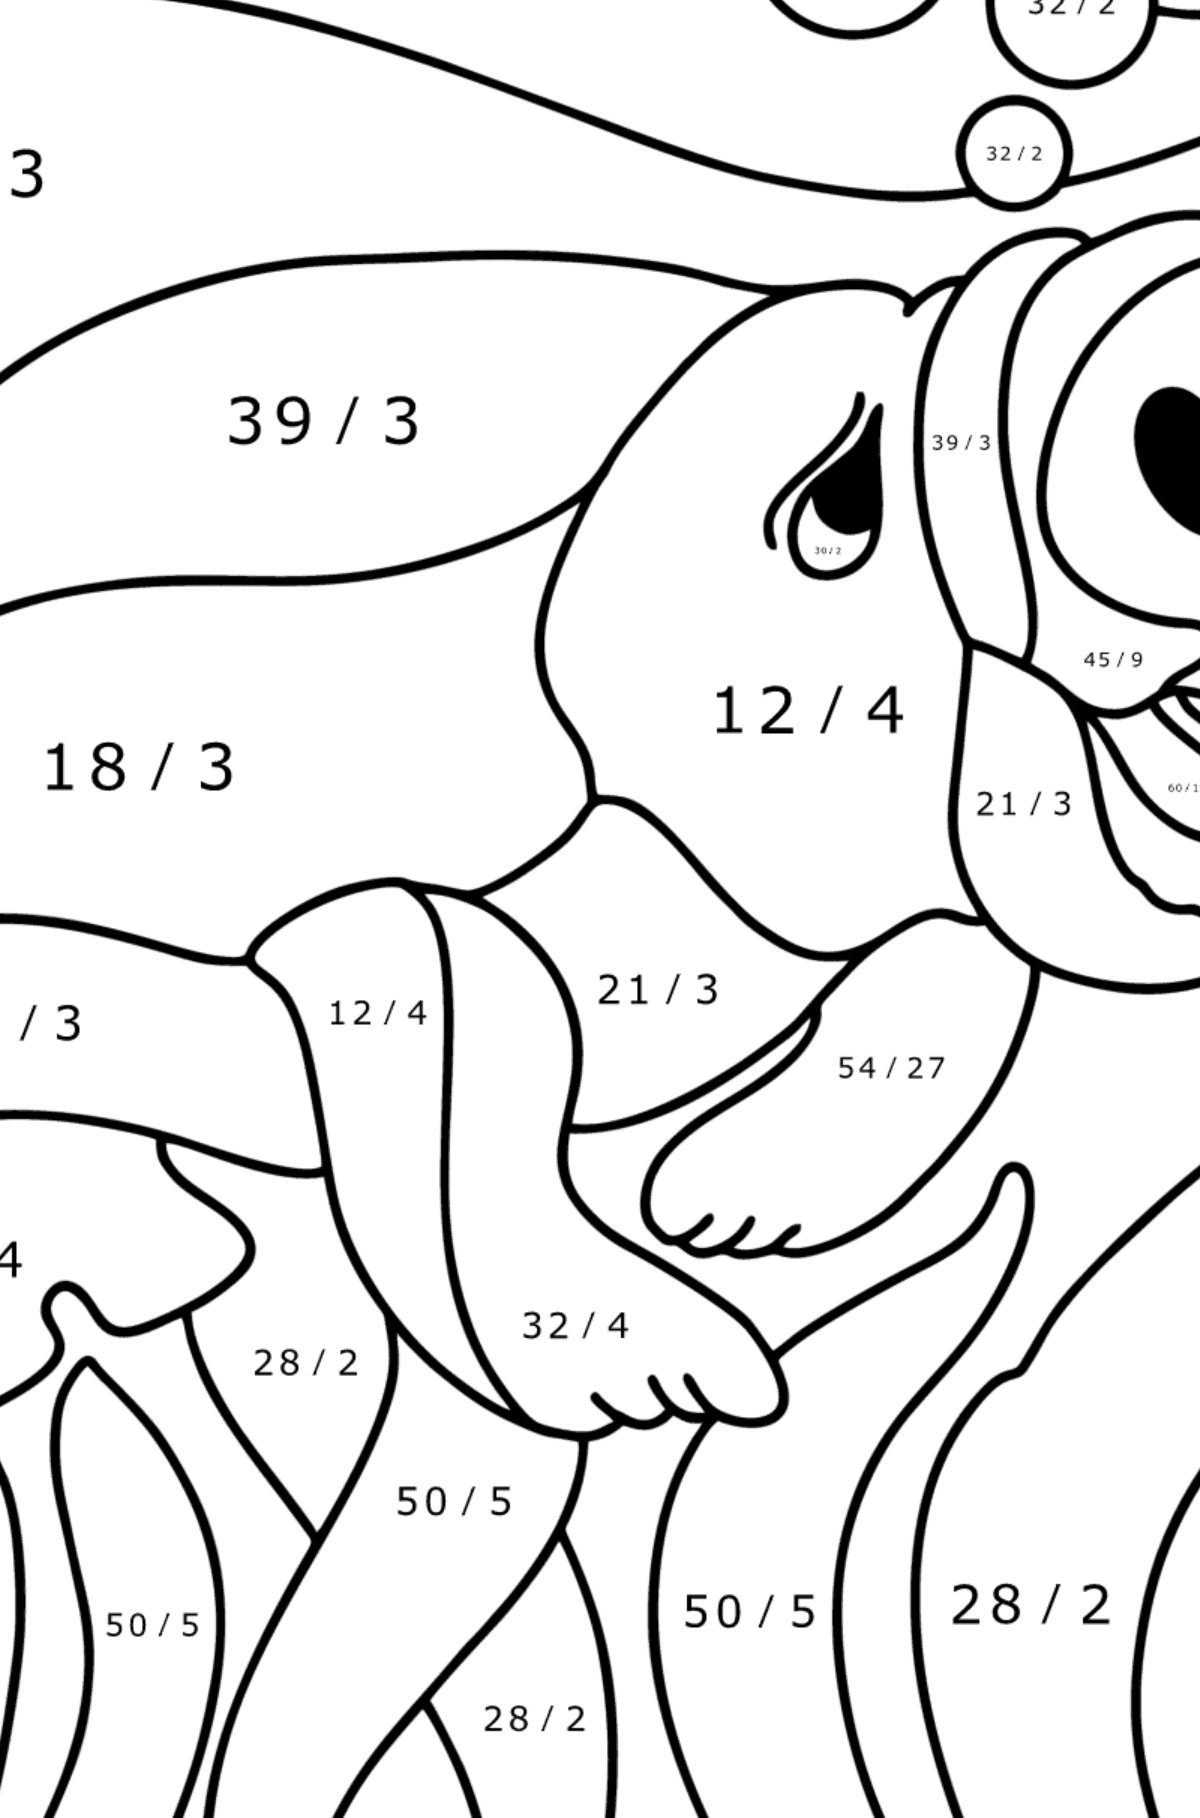 Stellar Cow coloring page - Math Coloring - Division for Kids